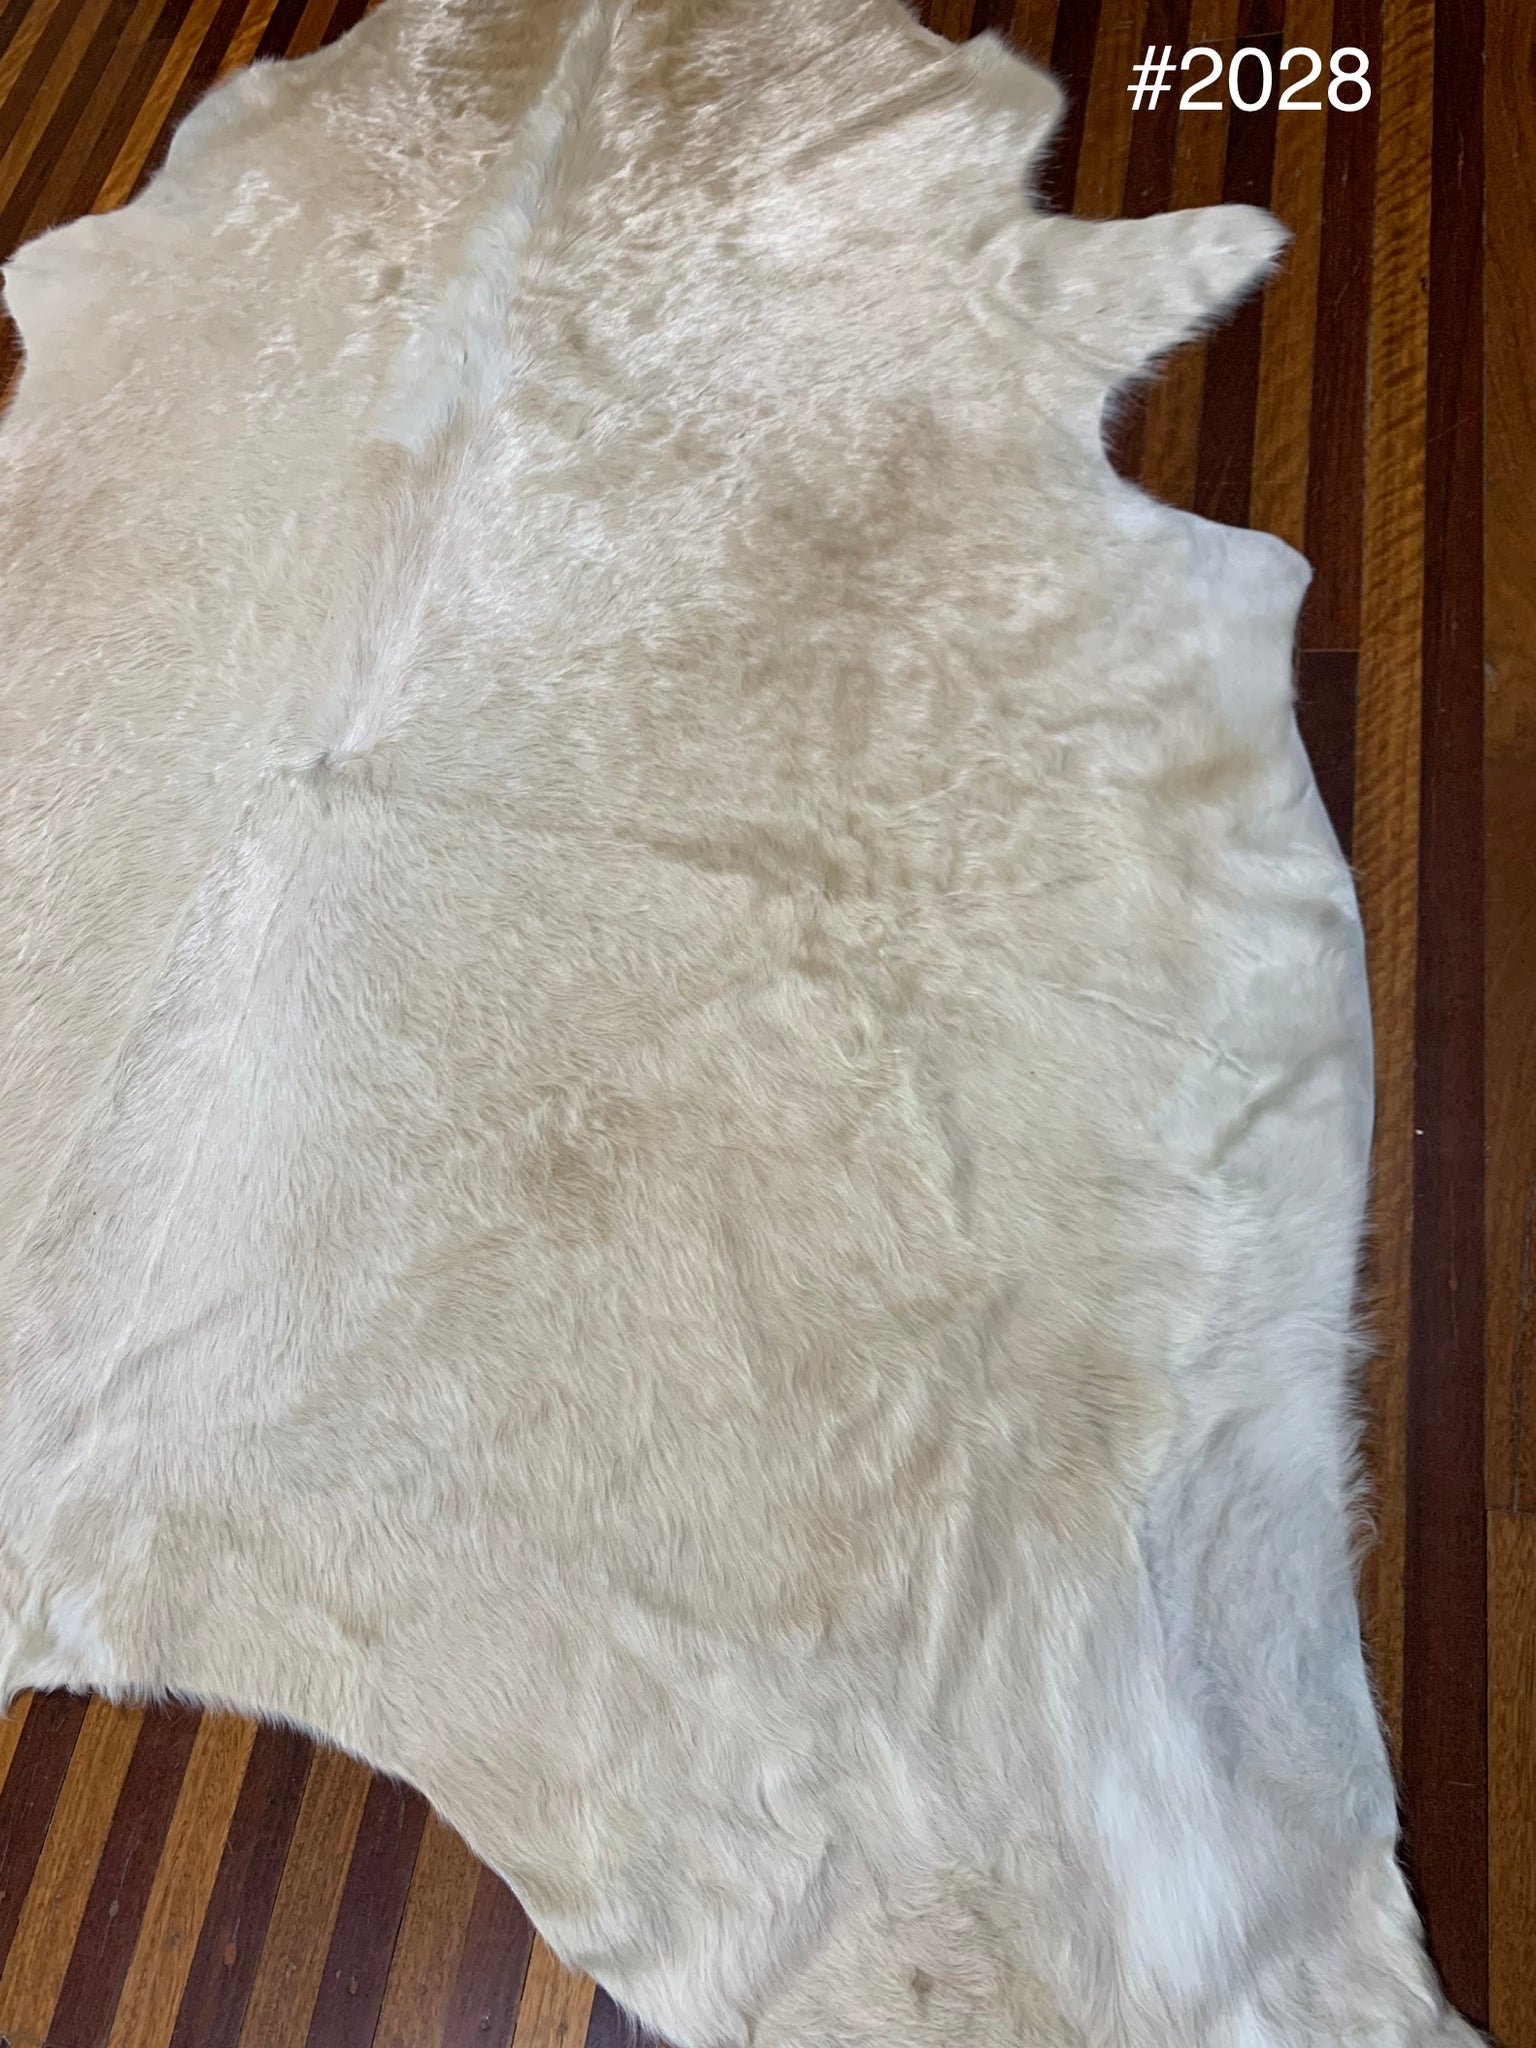 Coffee Table Cow Hide #2028